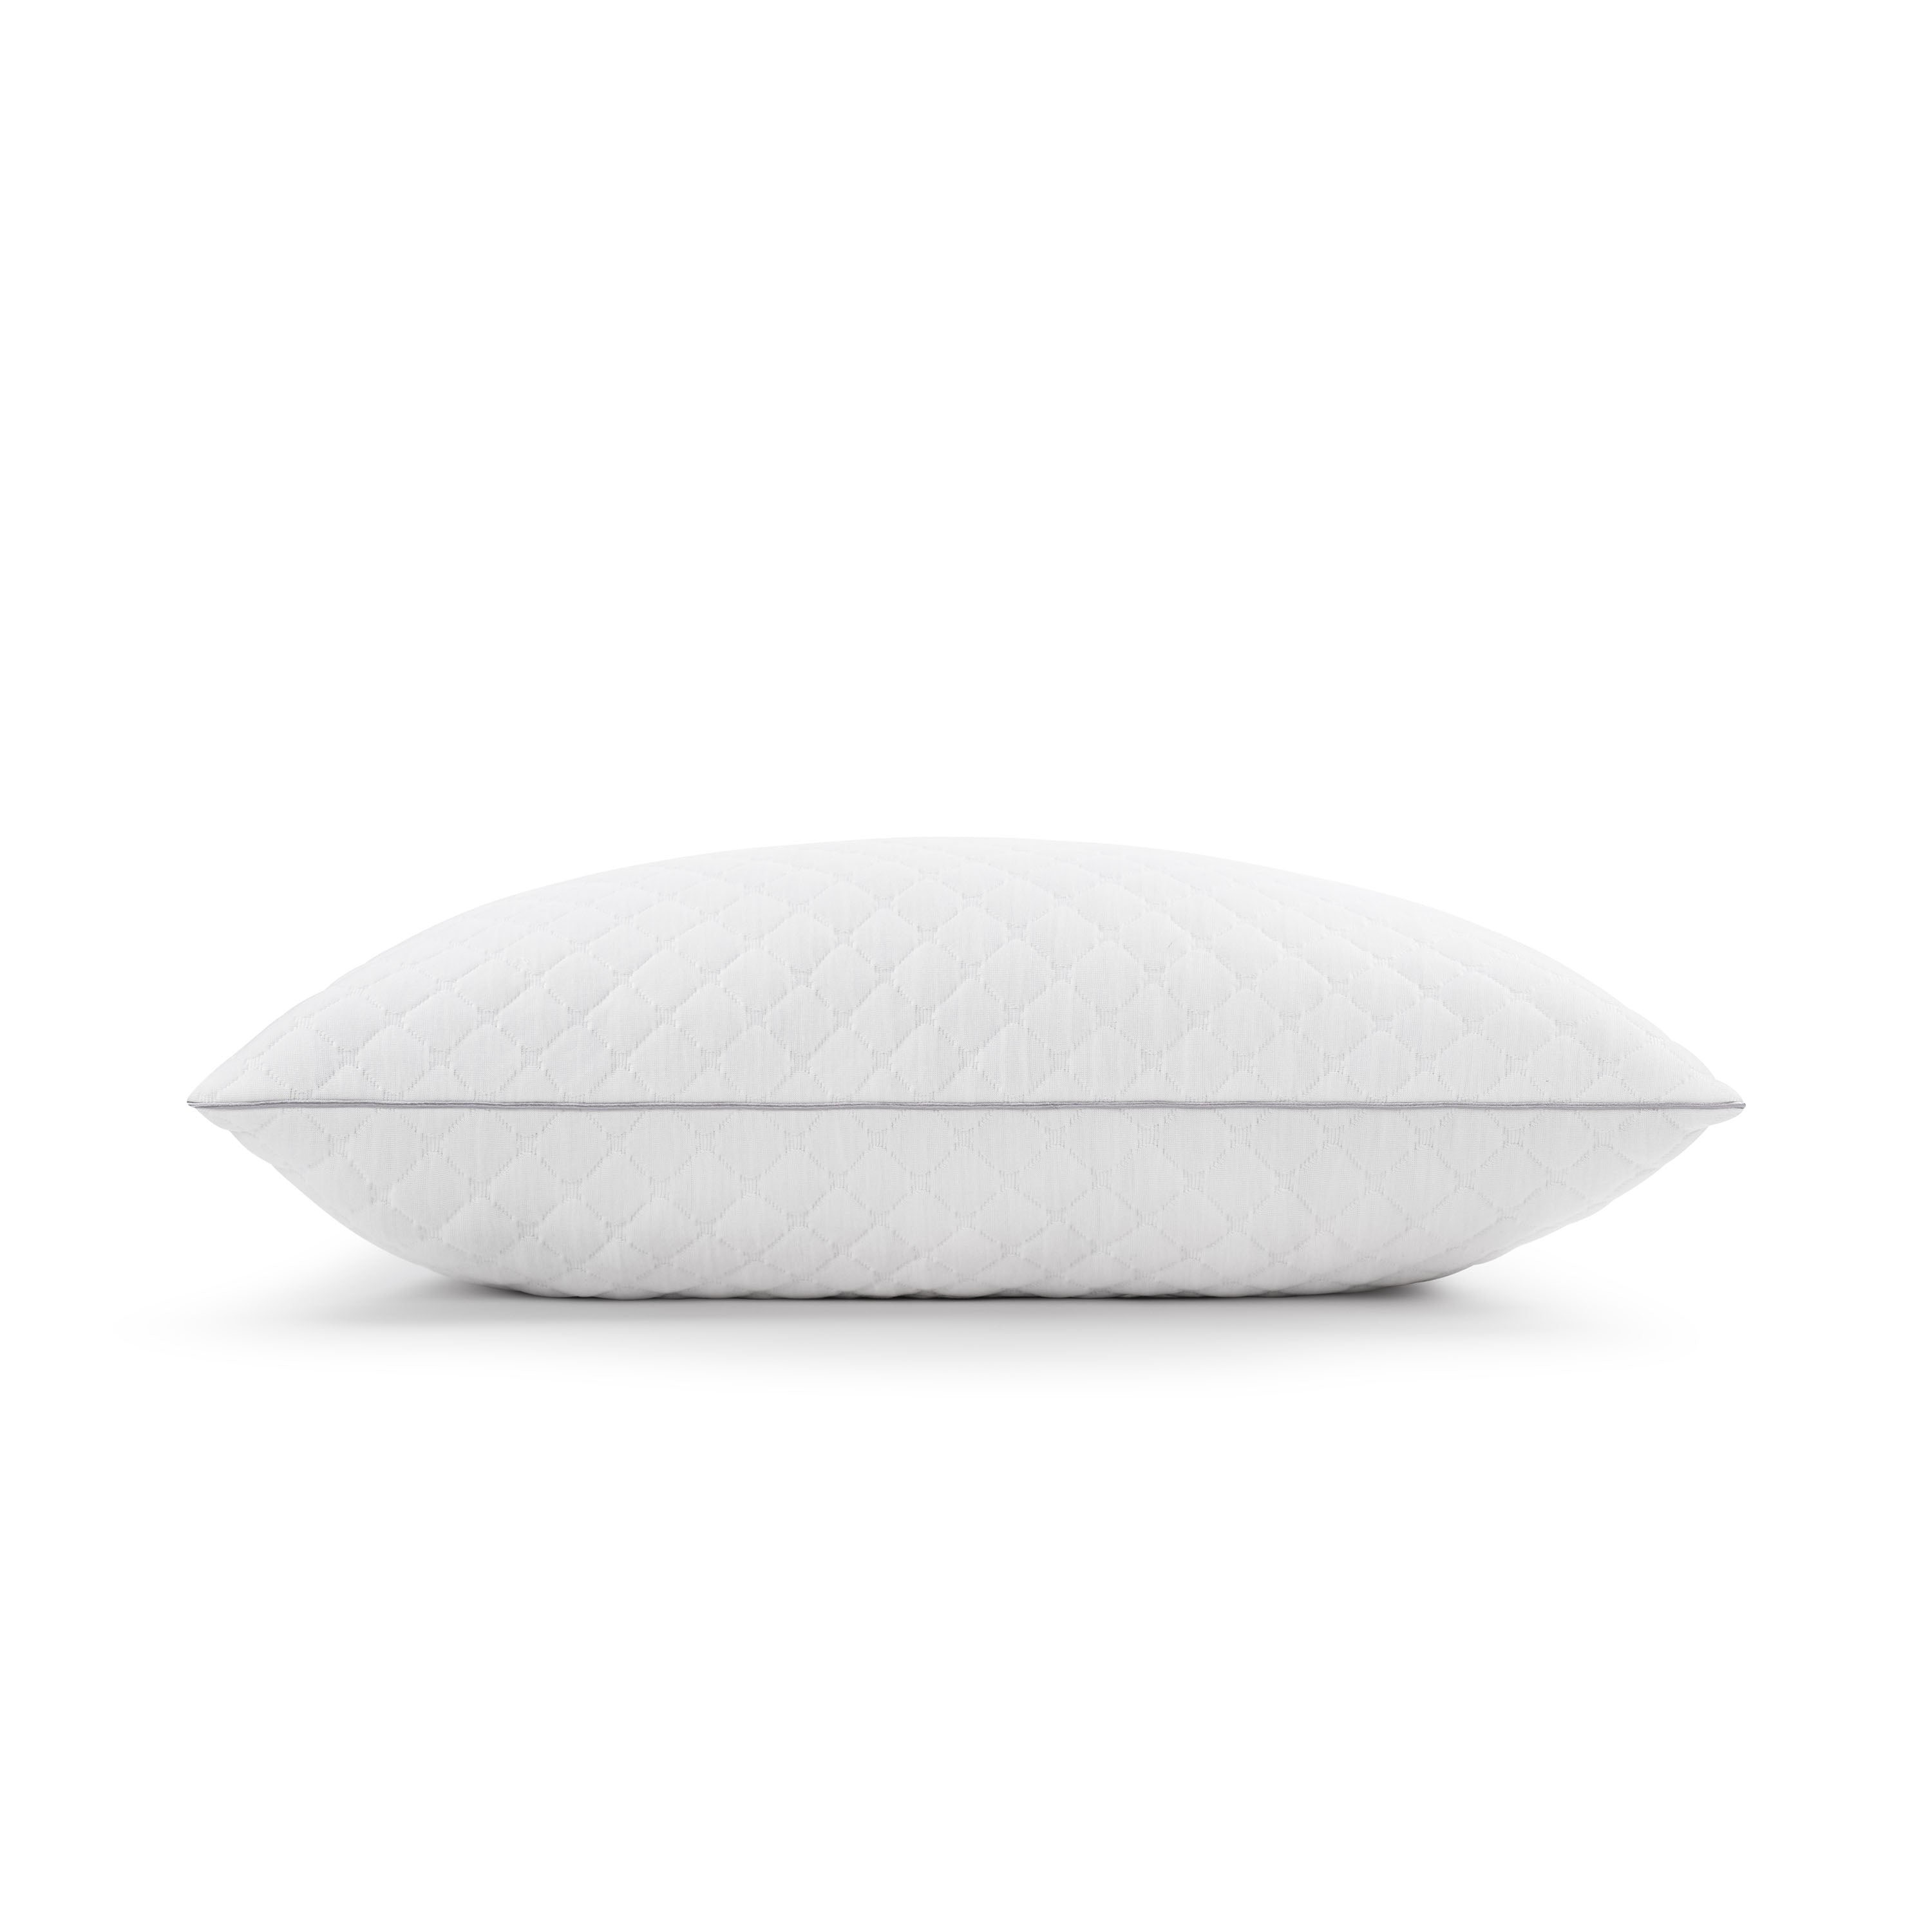 Memory Foam Cluster Knit Pillows | 2-Pack